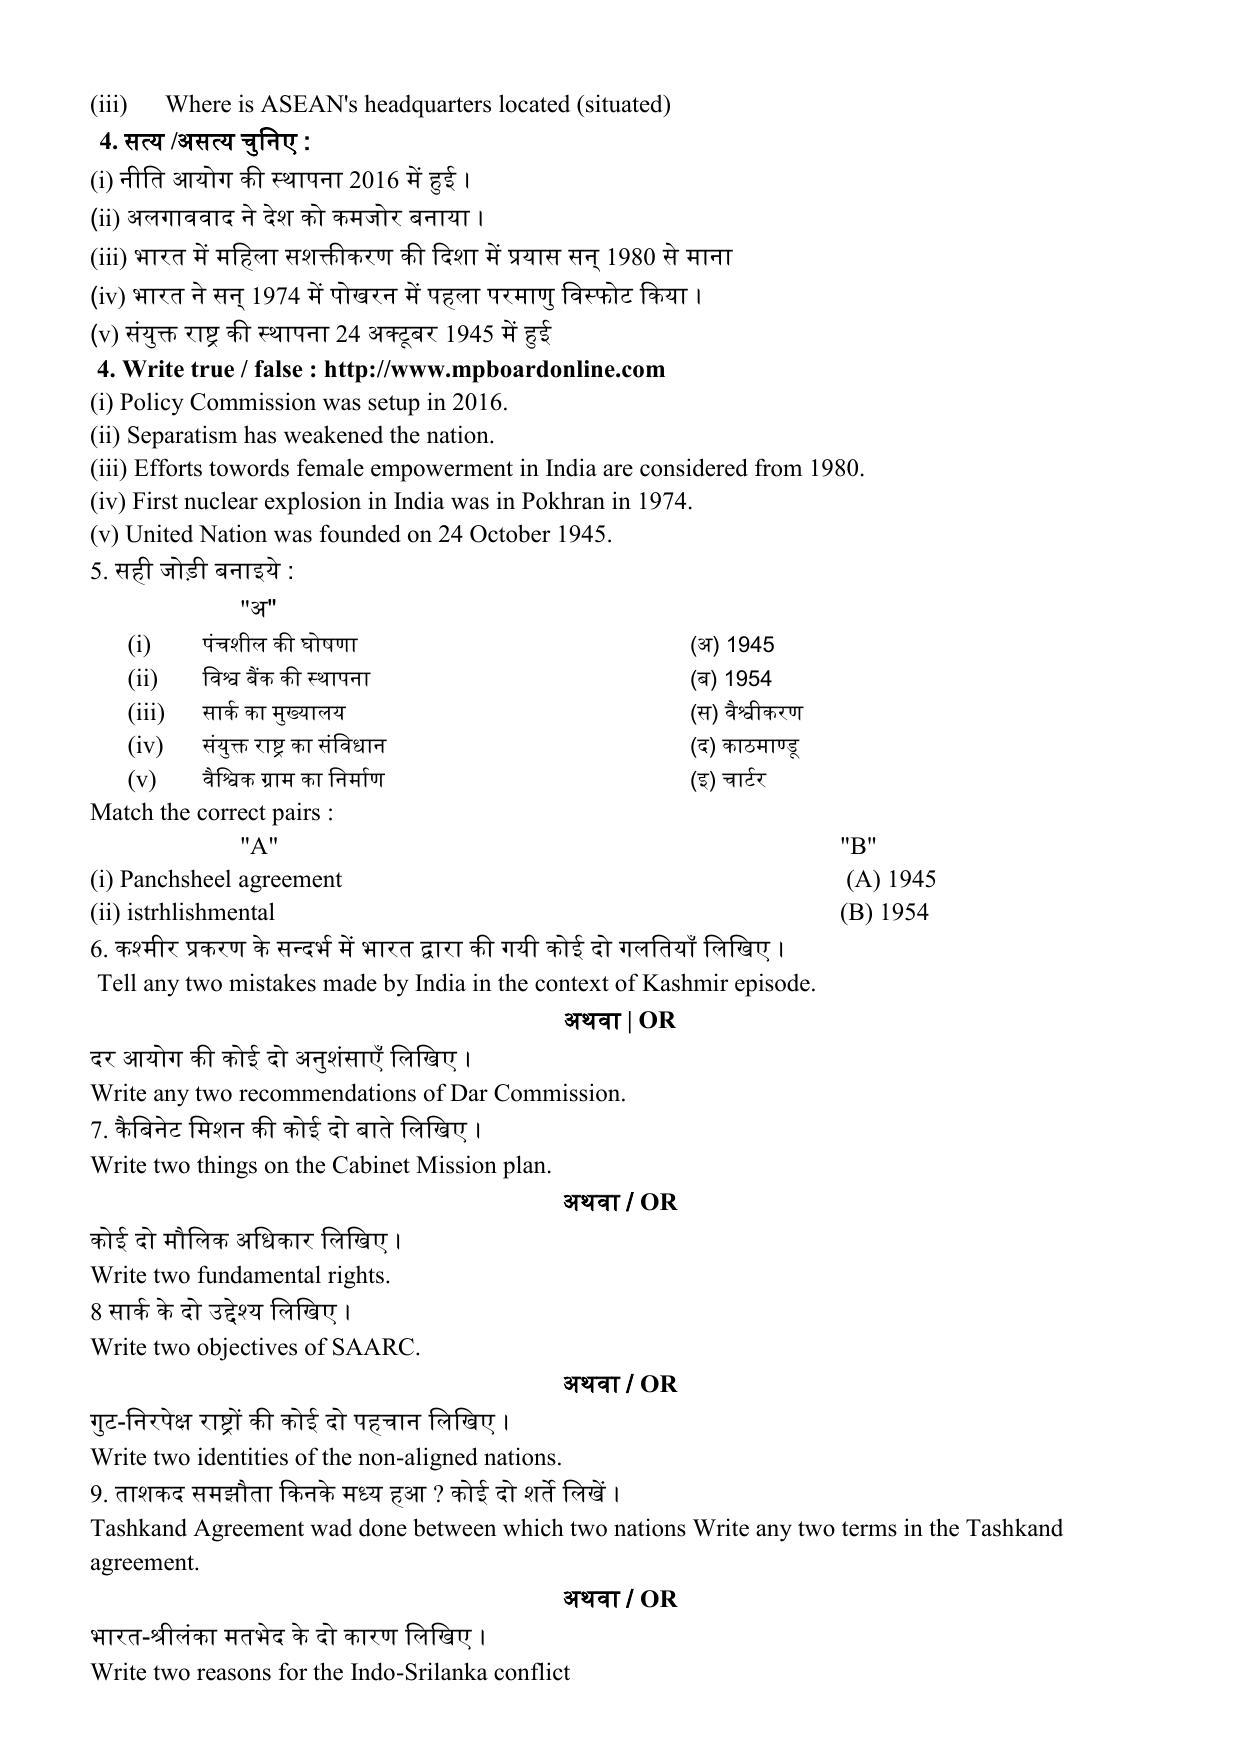 MP Board Class 12 Political Science 2019 Question Paper - Page 2